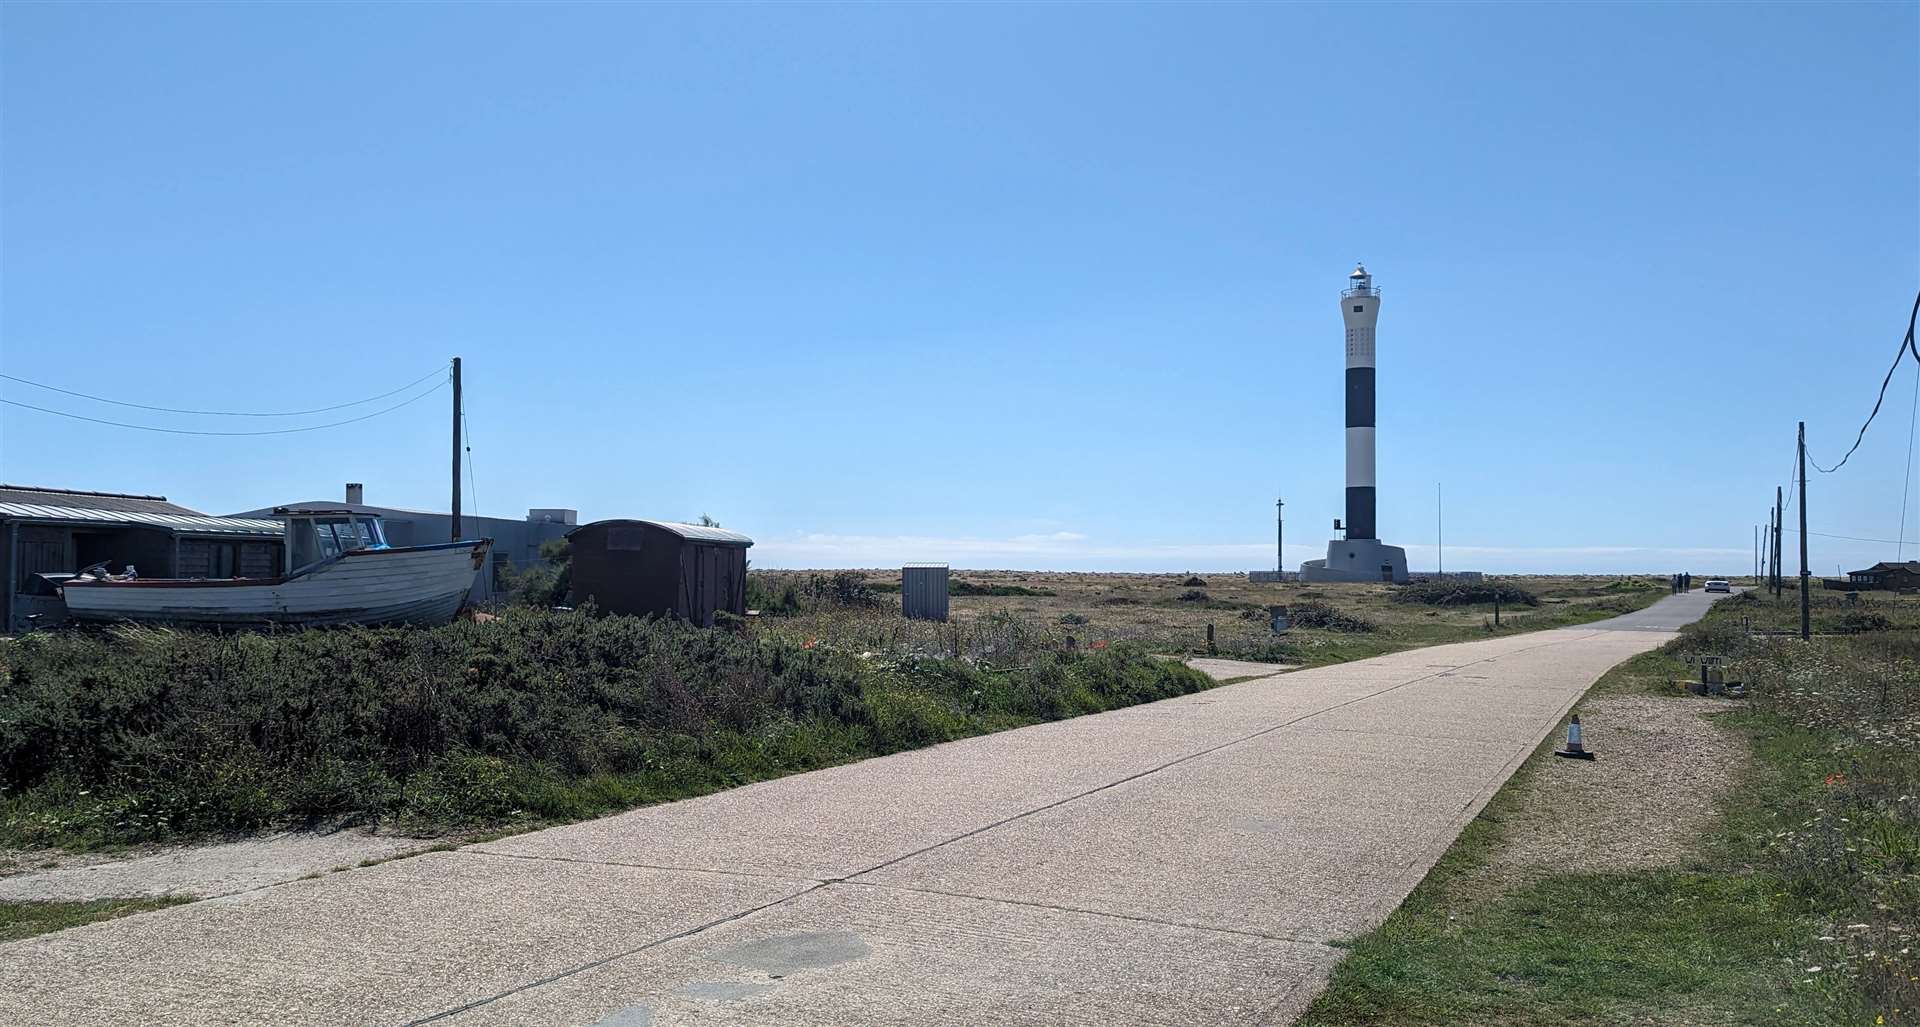 The black and white lighthouse at Dungeness is mentioned by Sheeran